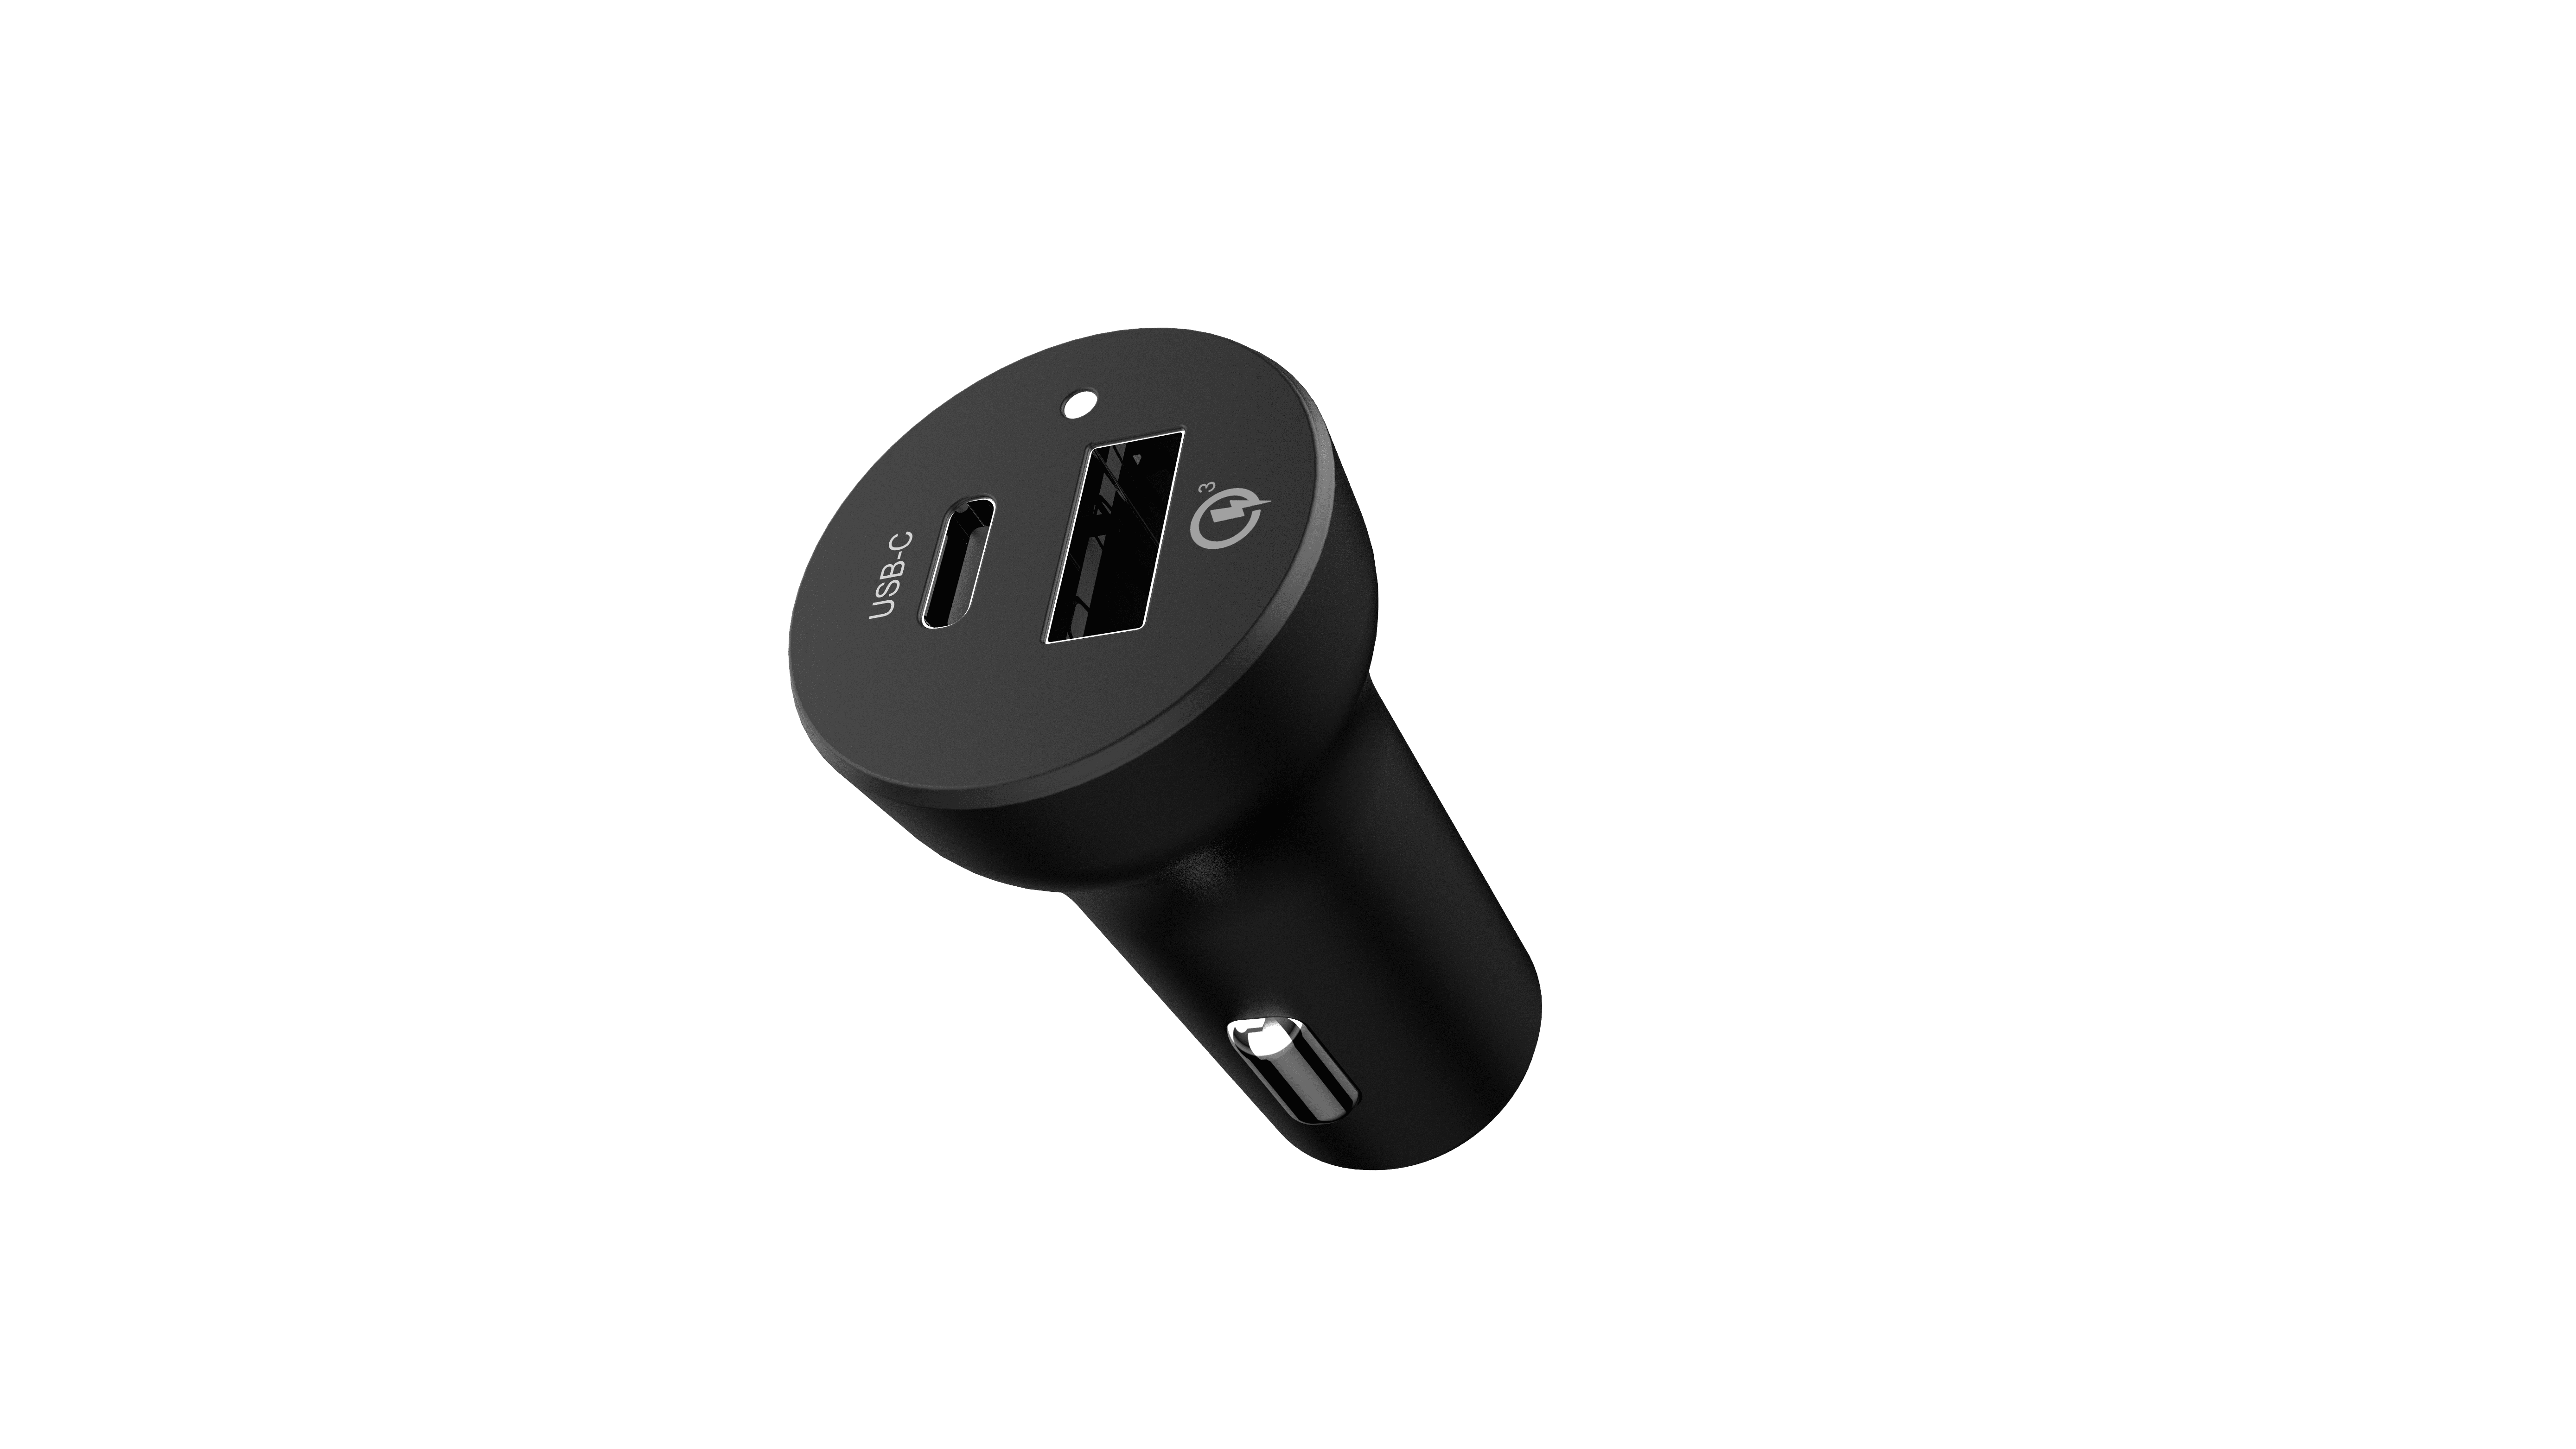 Auto Drive Quick Charge 3.0 USB Car Charger, Dual USB Type A and USB Type C Charging Ports